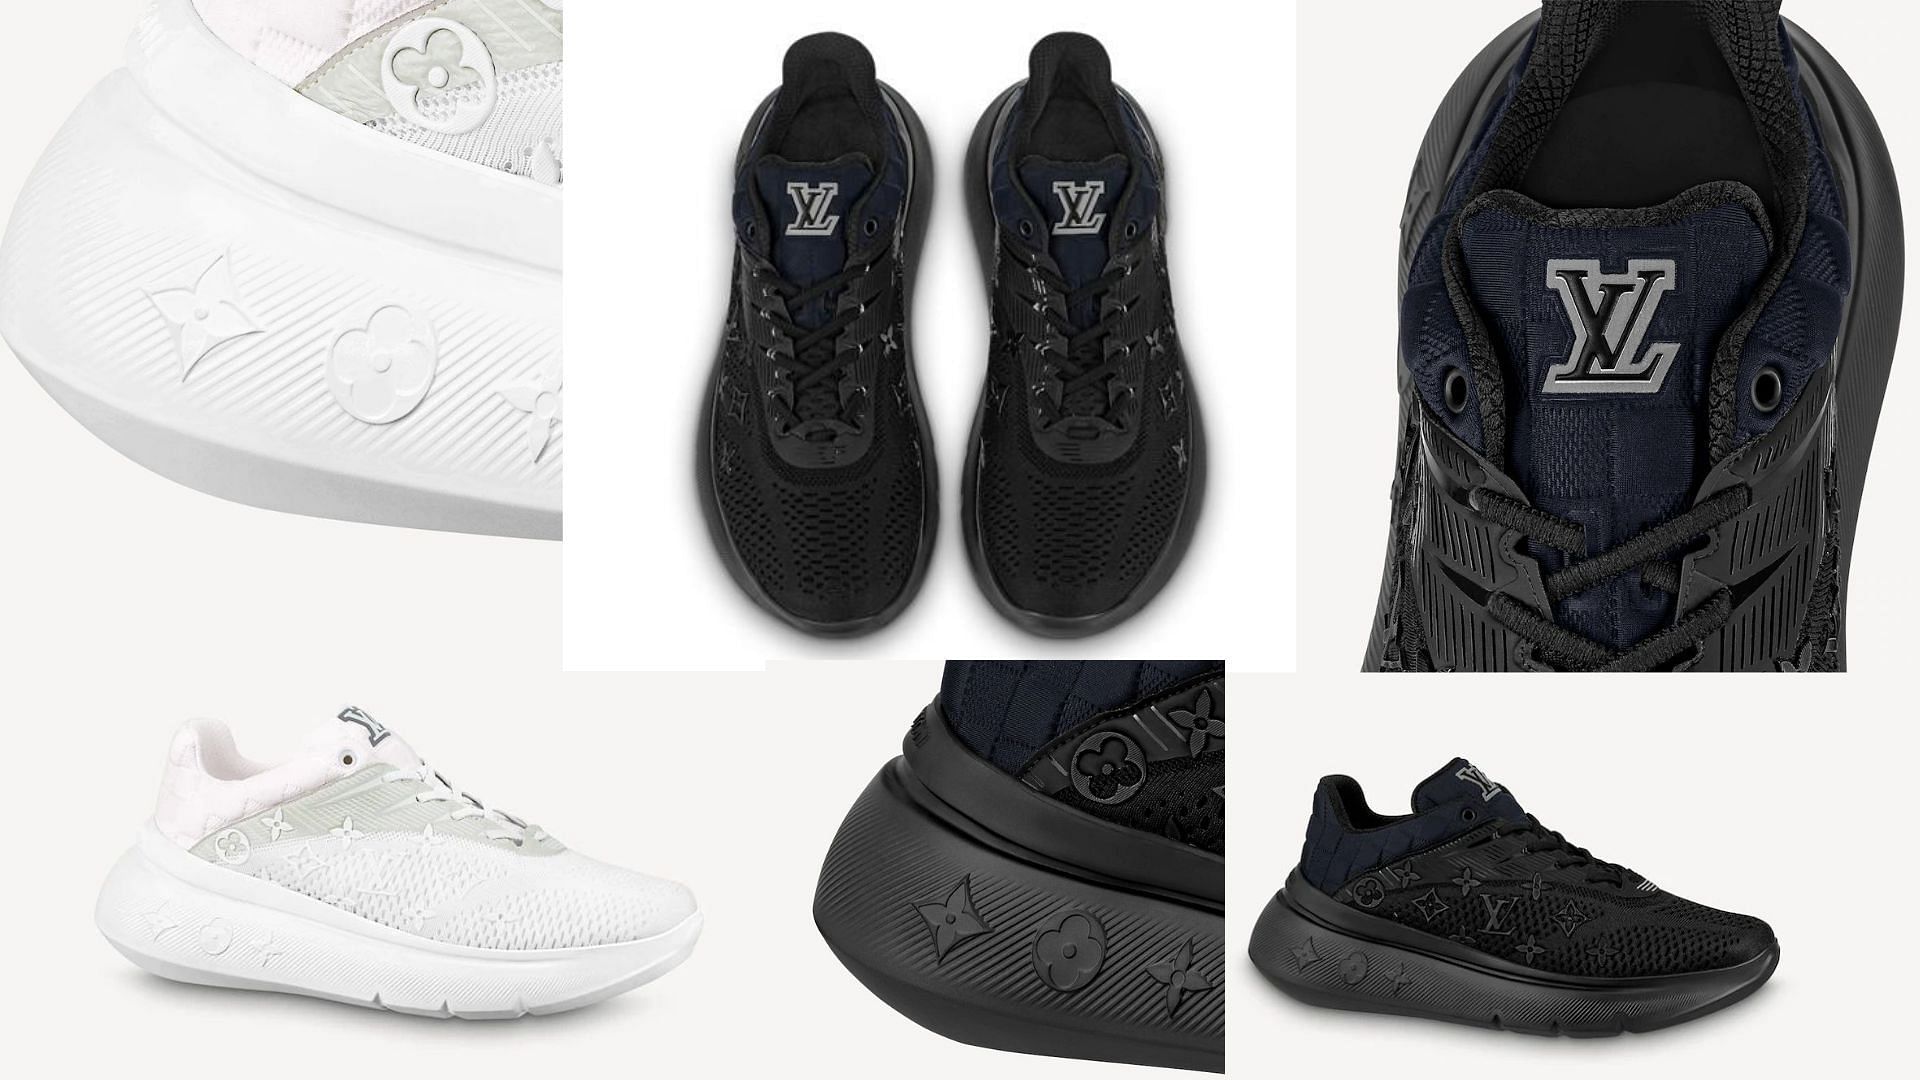 Where to buy Louis Vuitton sneakers with flower monogram? Price and more